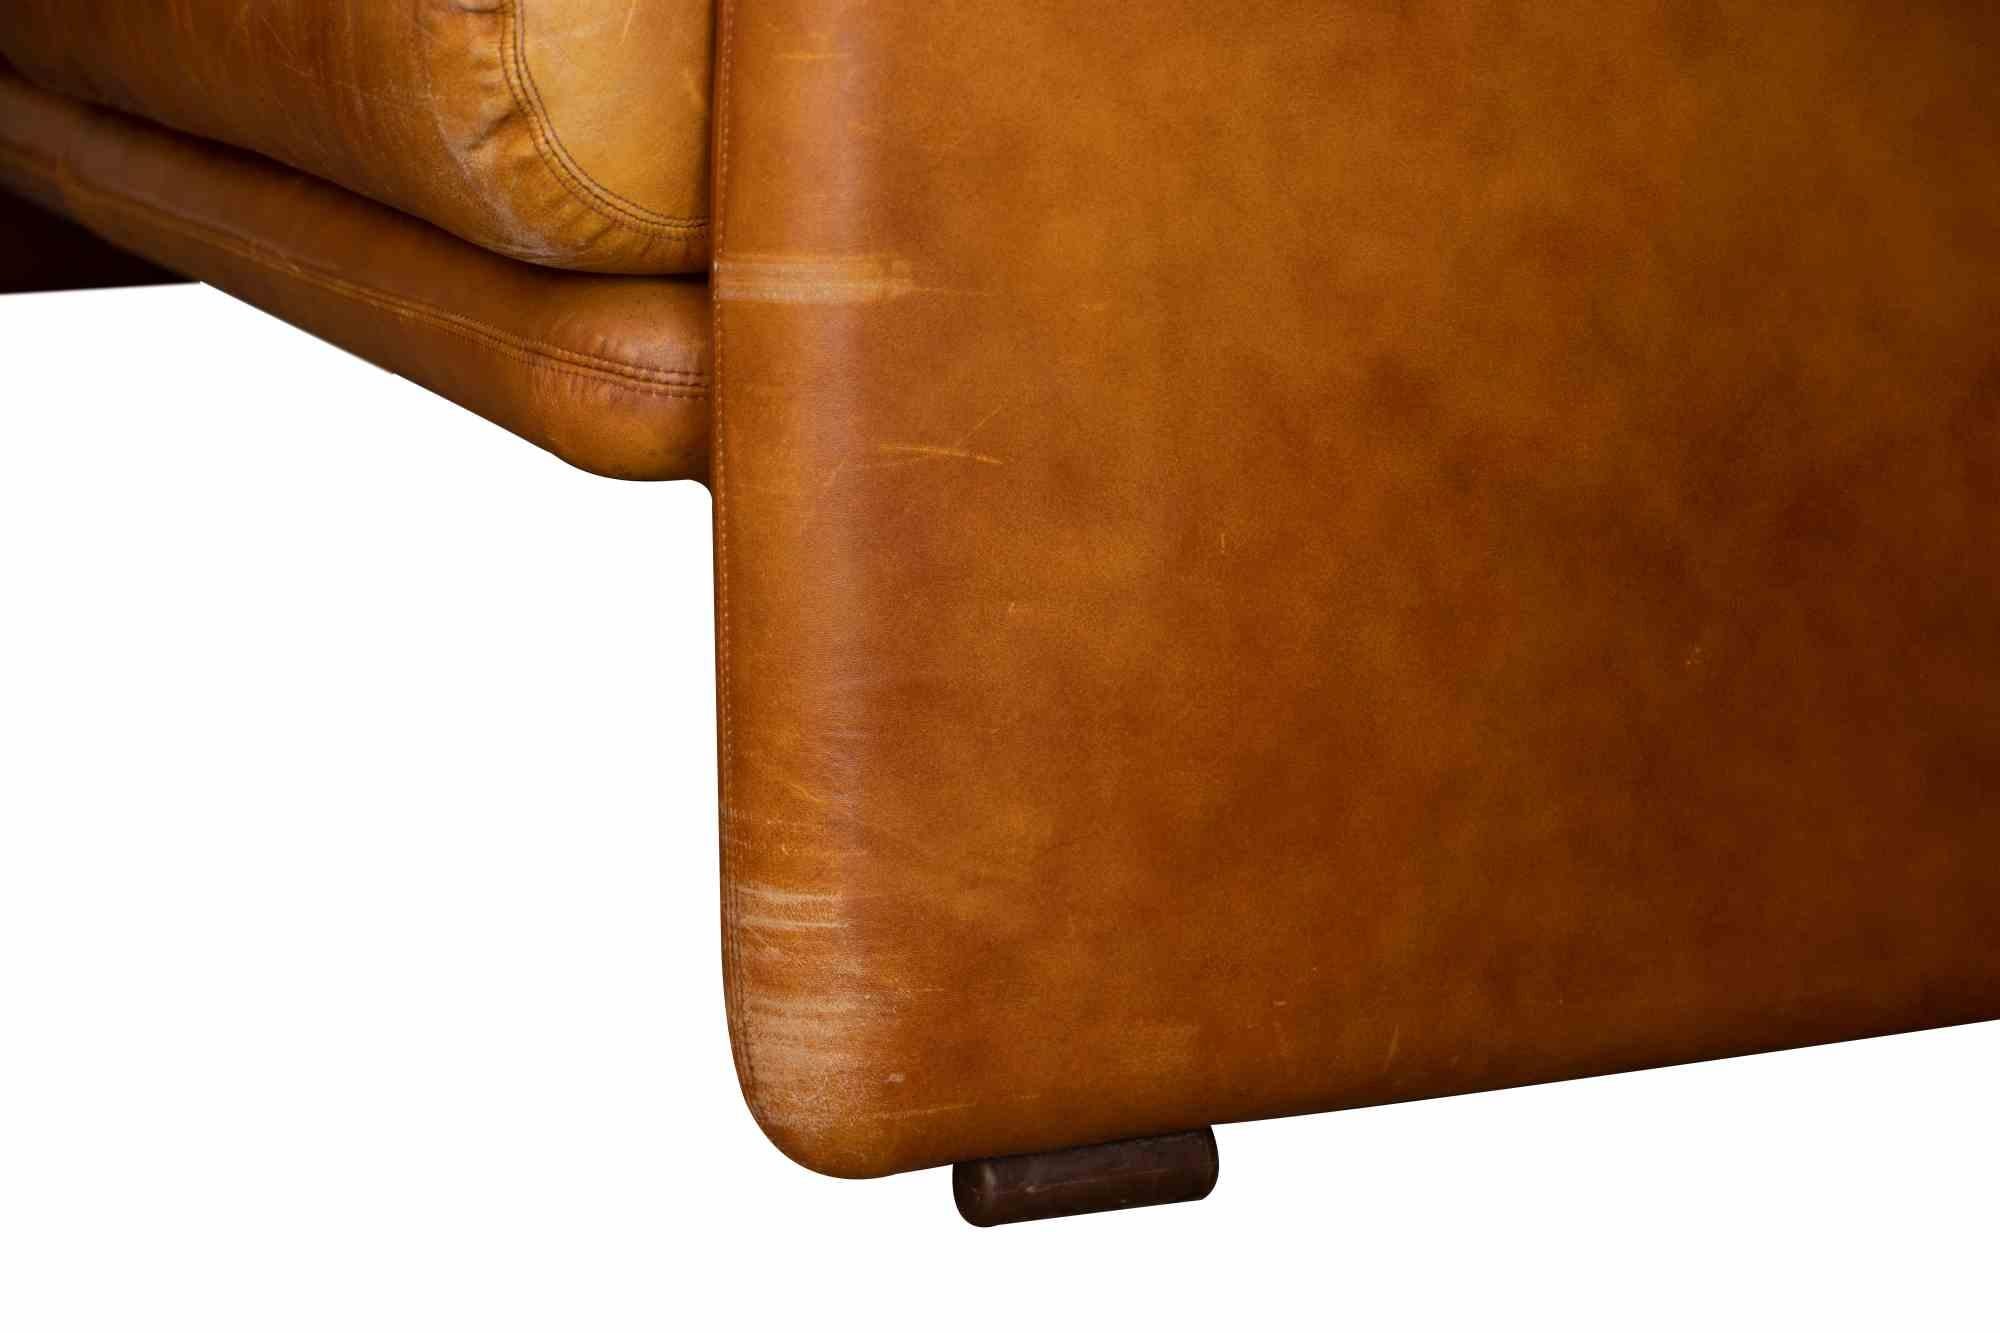 Coronado set is a vintage design set realized by Afra Bianchin and Tobia Scarpa for their company, B&B Italia, in the 1960s.

This set is composed by a sofa and two armchairs model Coronado. Brown leather. Label manufacturer with specific details